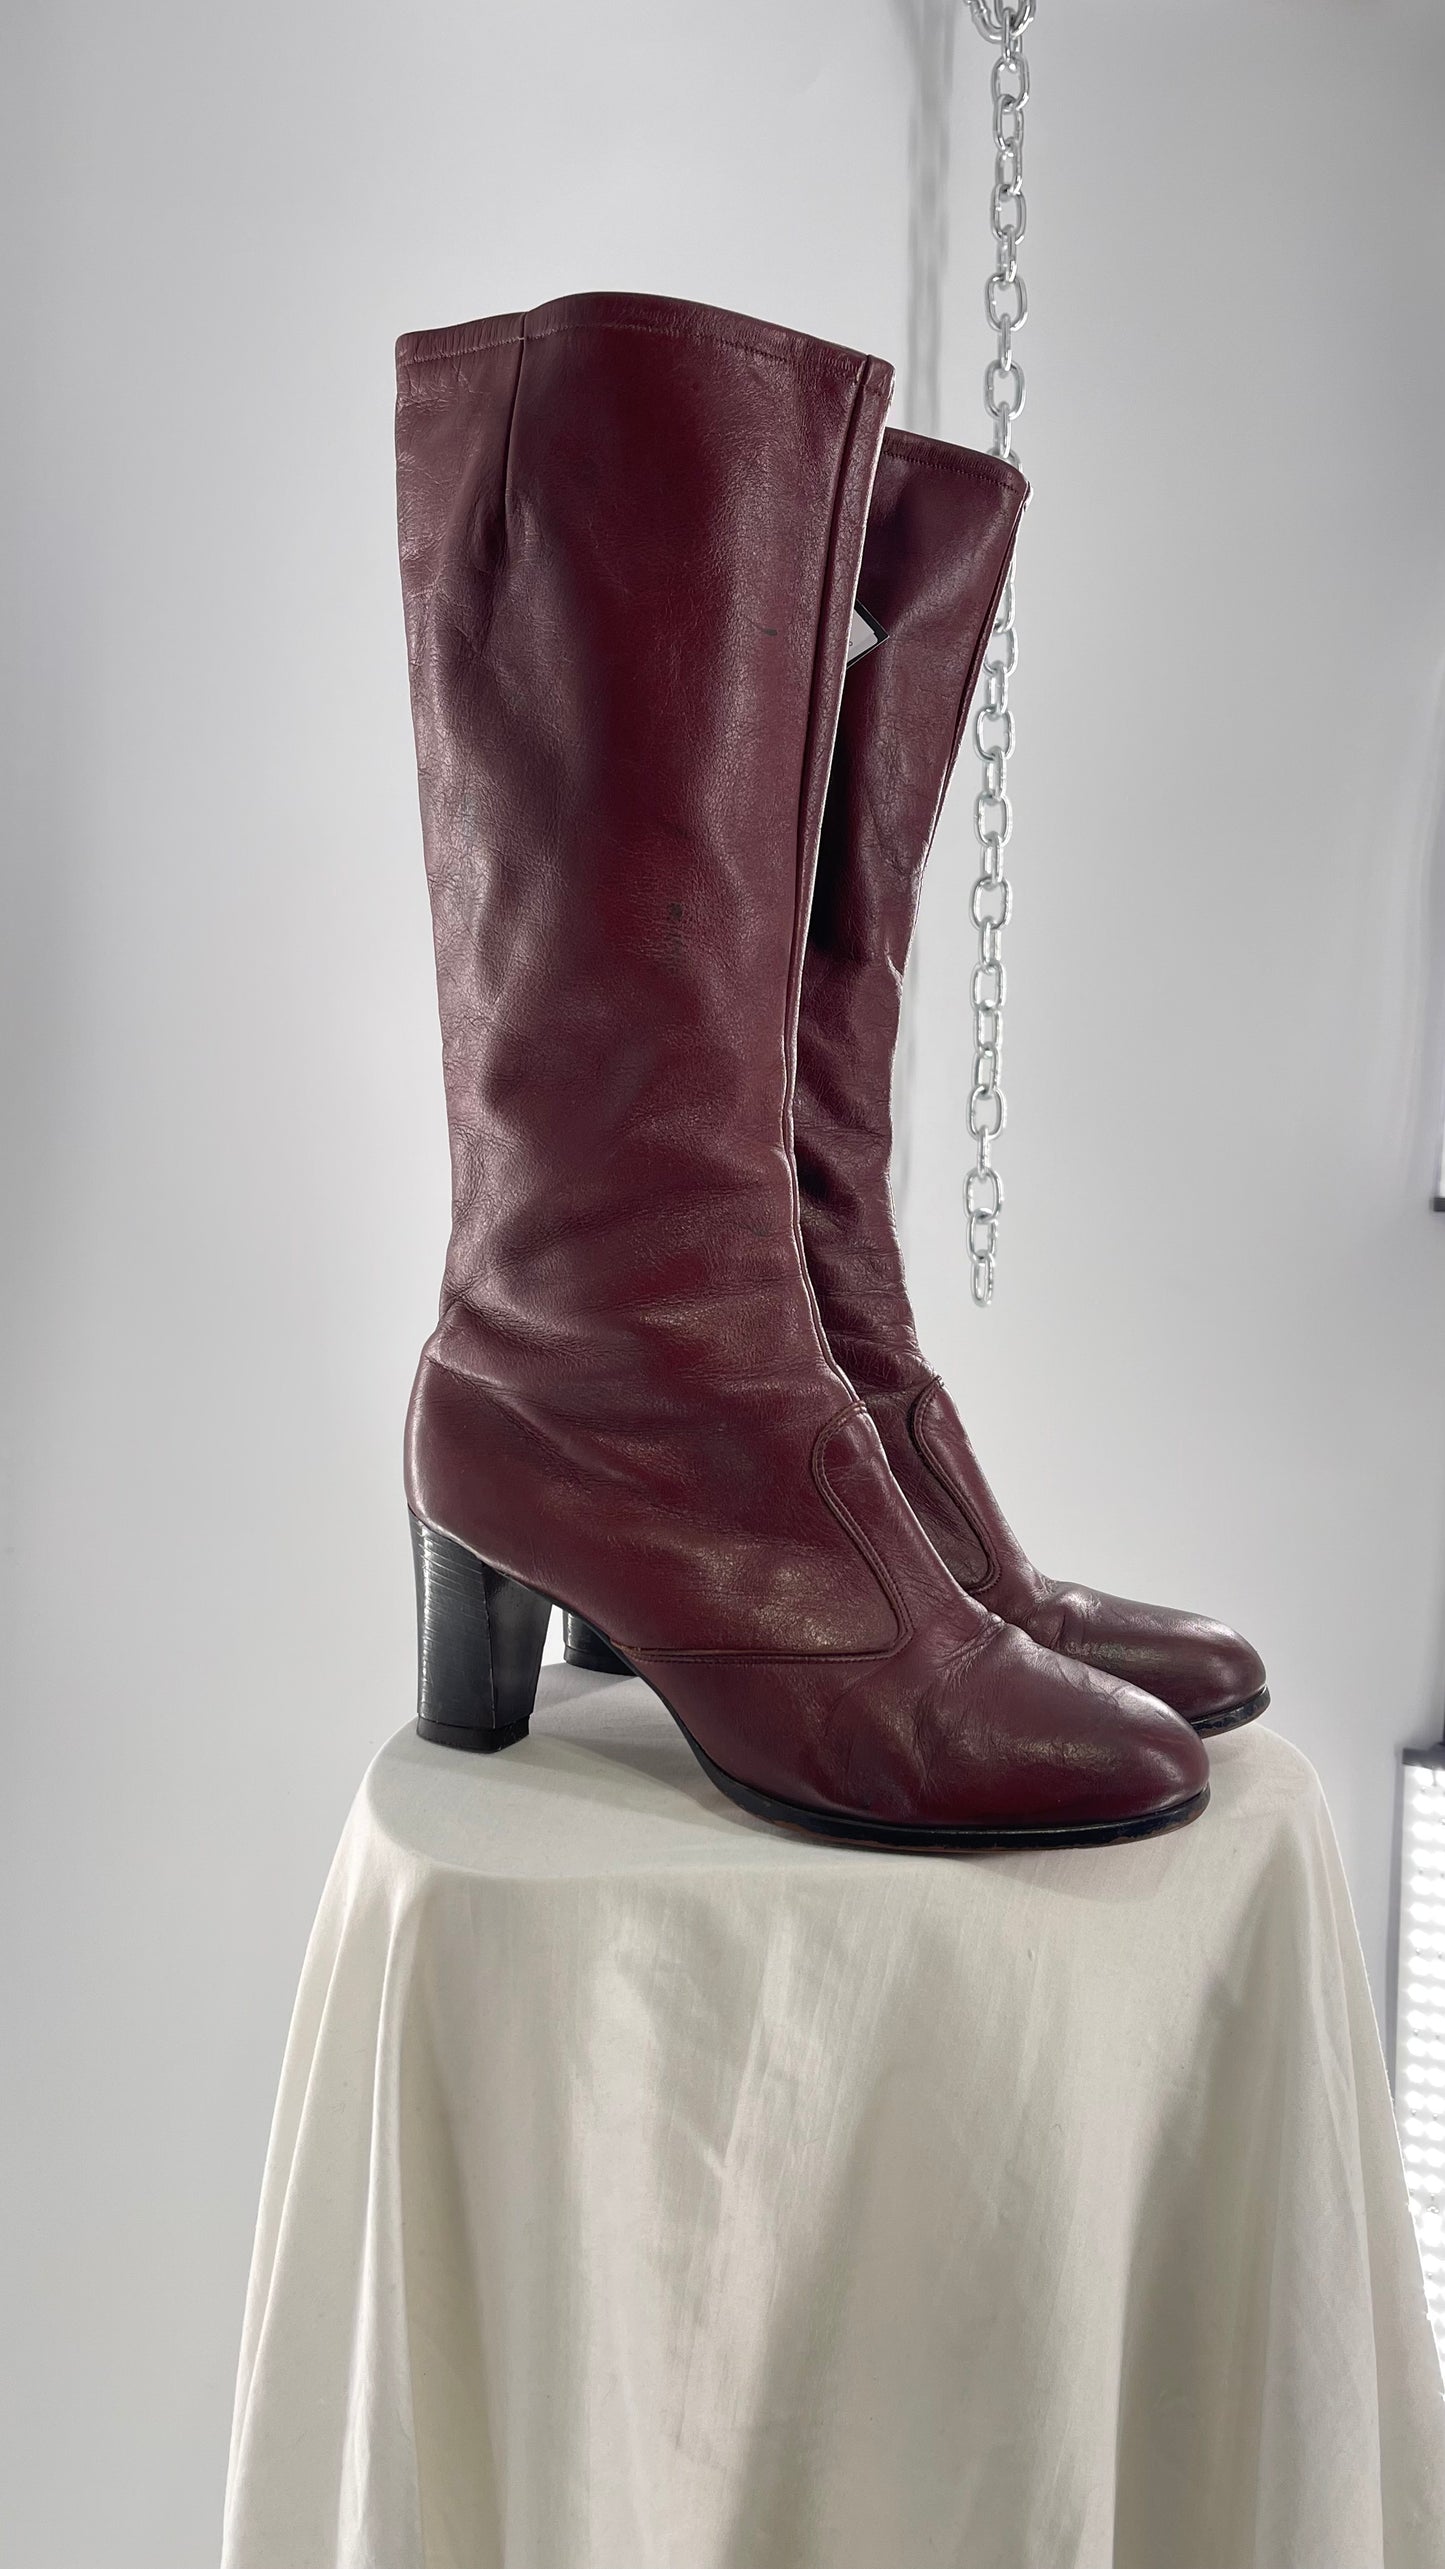 Vintage Cherry Cola Red Knee High Leather Boot with Heel (8.5)